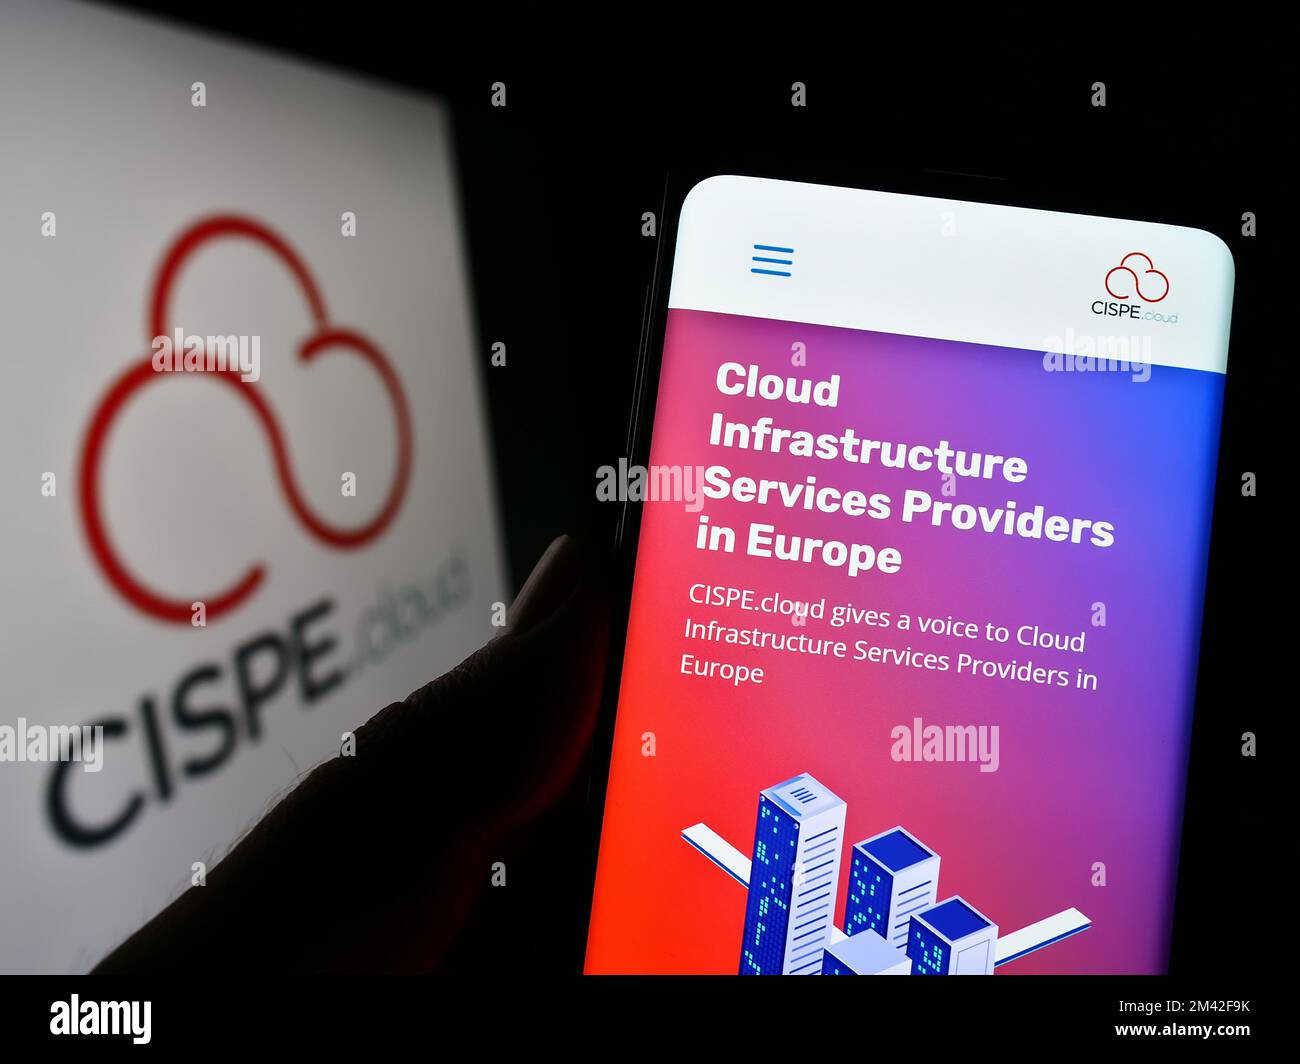 Person holding smartphone with website of cloud providers trade association CISPE on screen in front of logo. Focus on center of phone display. Stock Photo